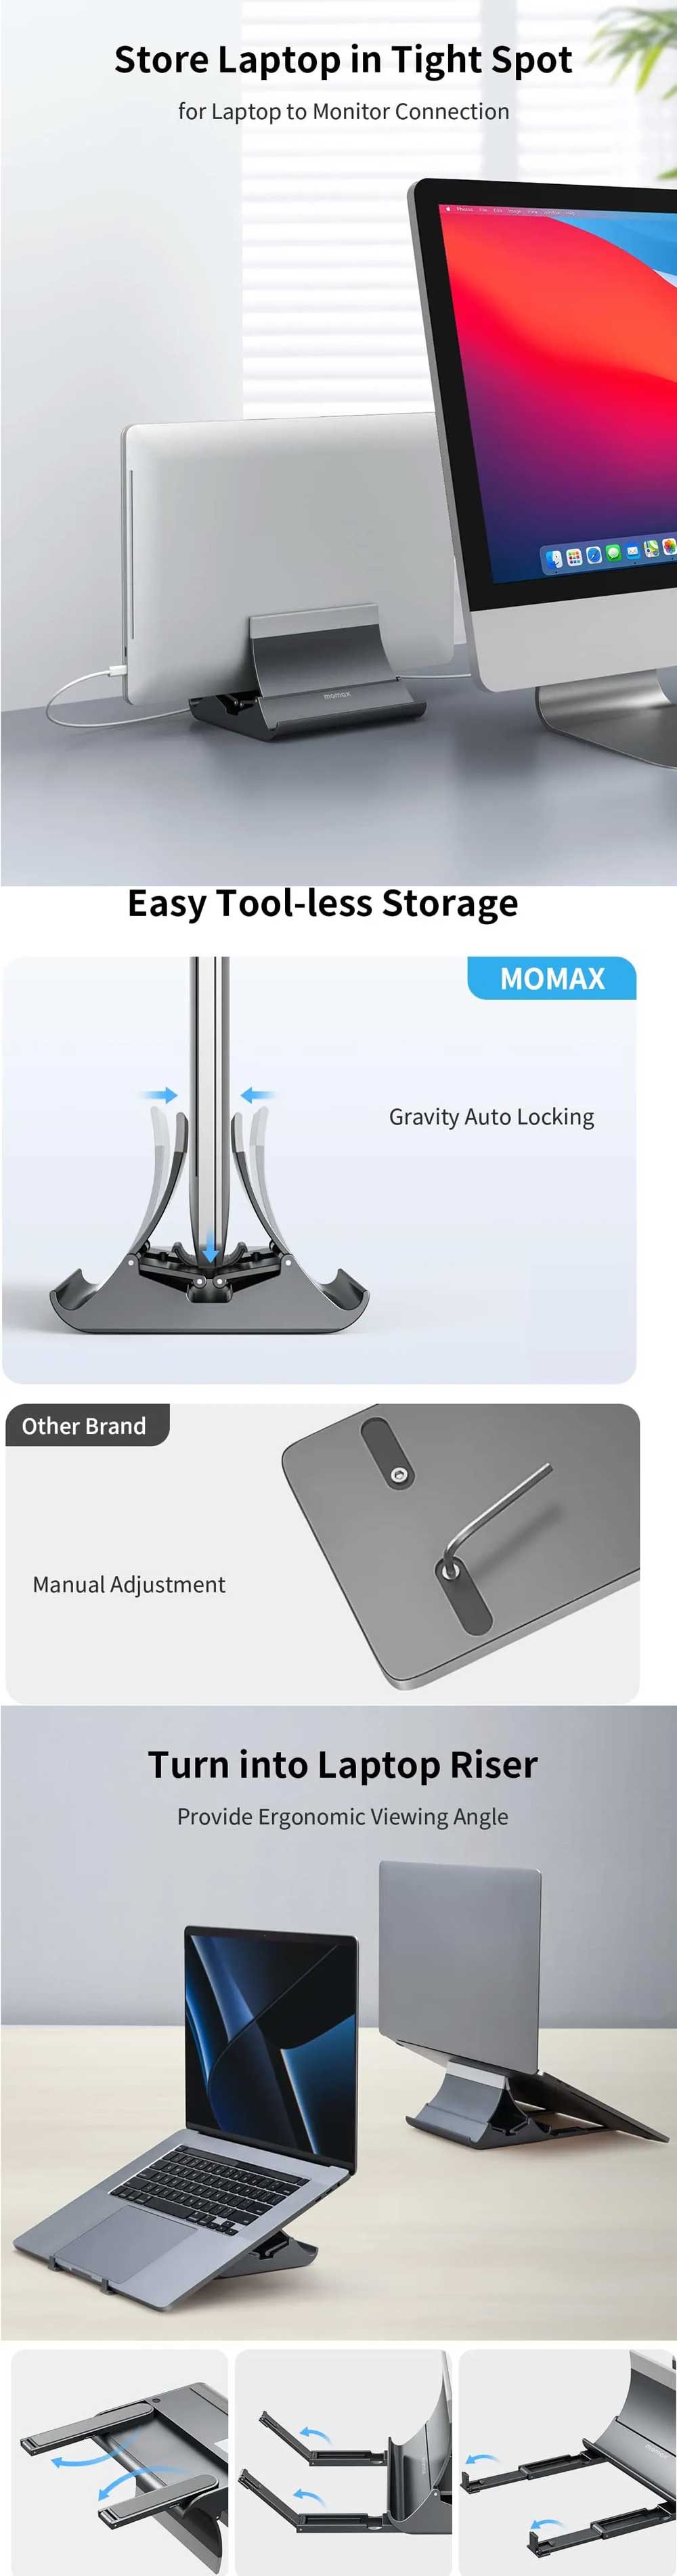 MOMAX KH17 Arch 3 Laptop Vertical Stand Gravity Auto Shrink Laptop Holder